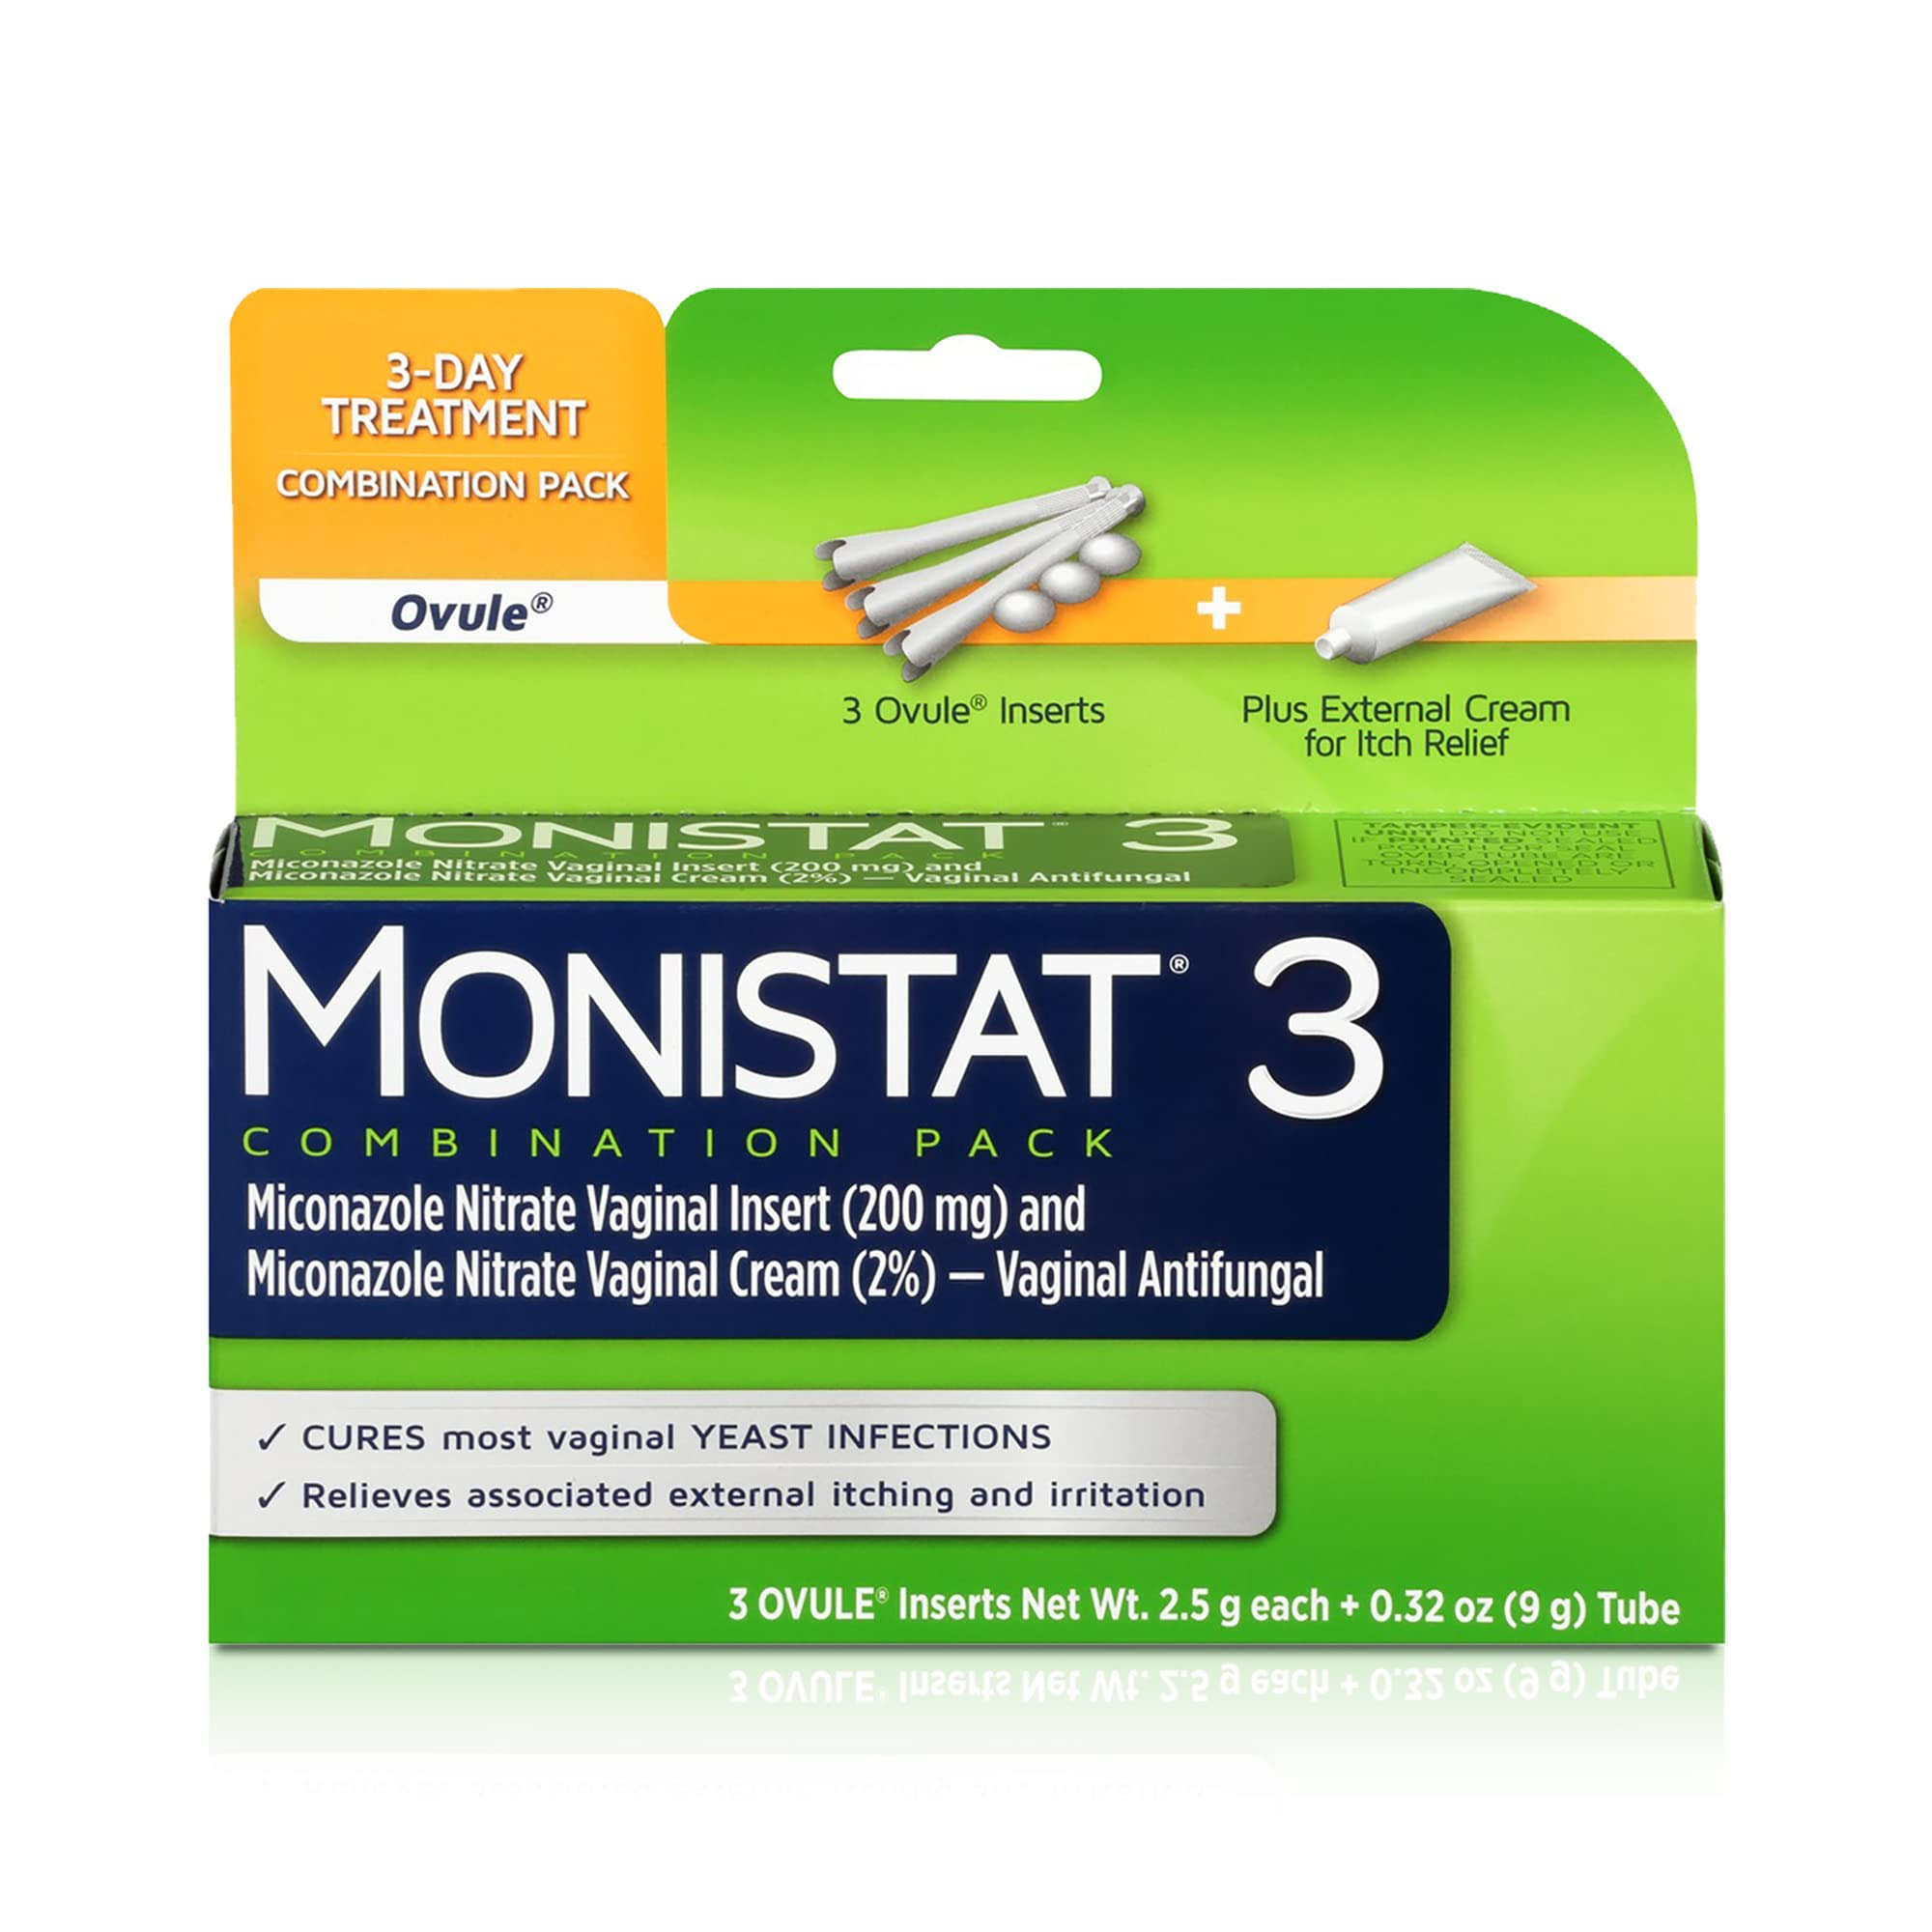 Monistat Cure and Itch Relief Vaginal Antifungal 3-Day Treatment with Ovules Insert - 0.32oz